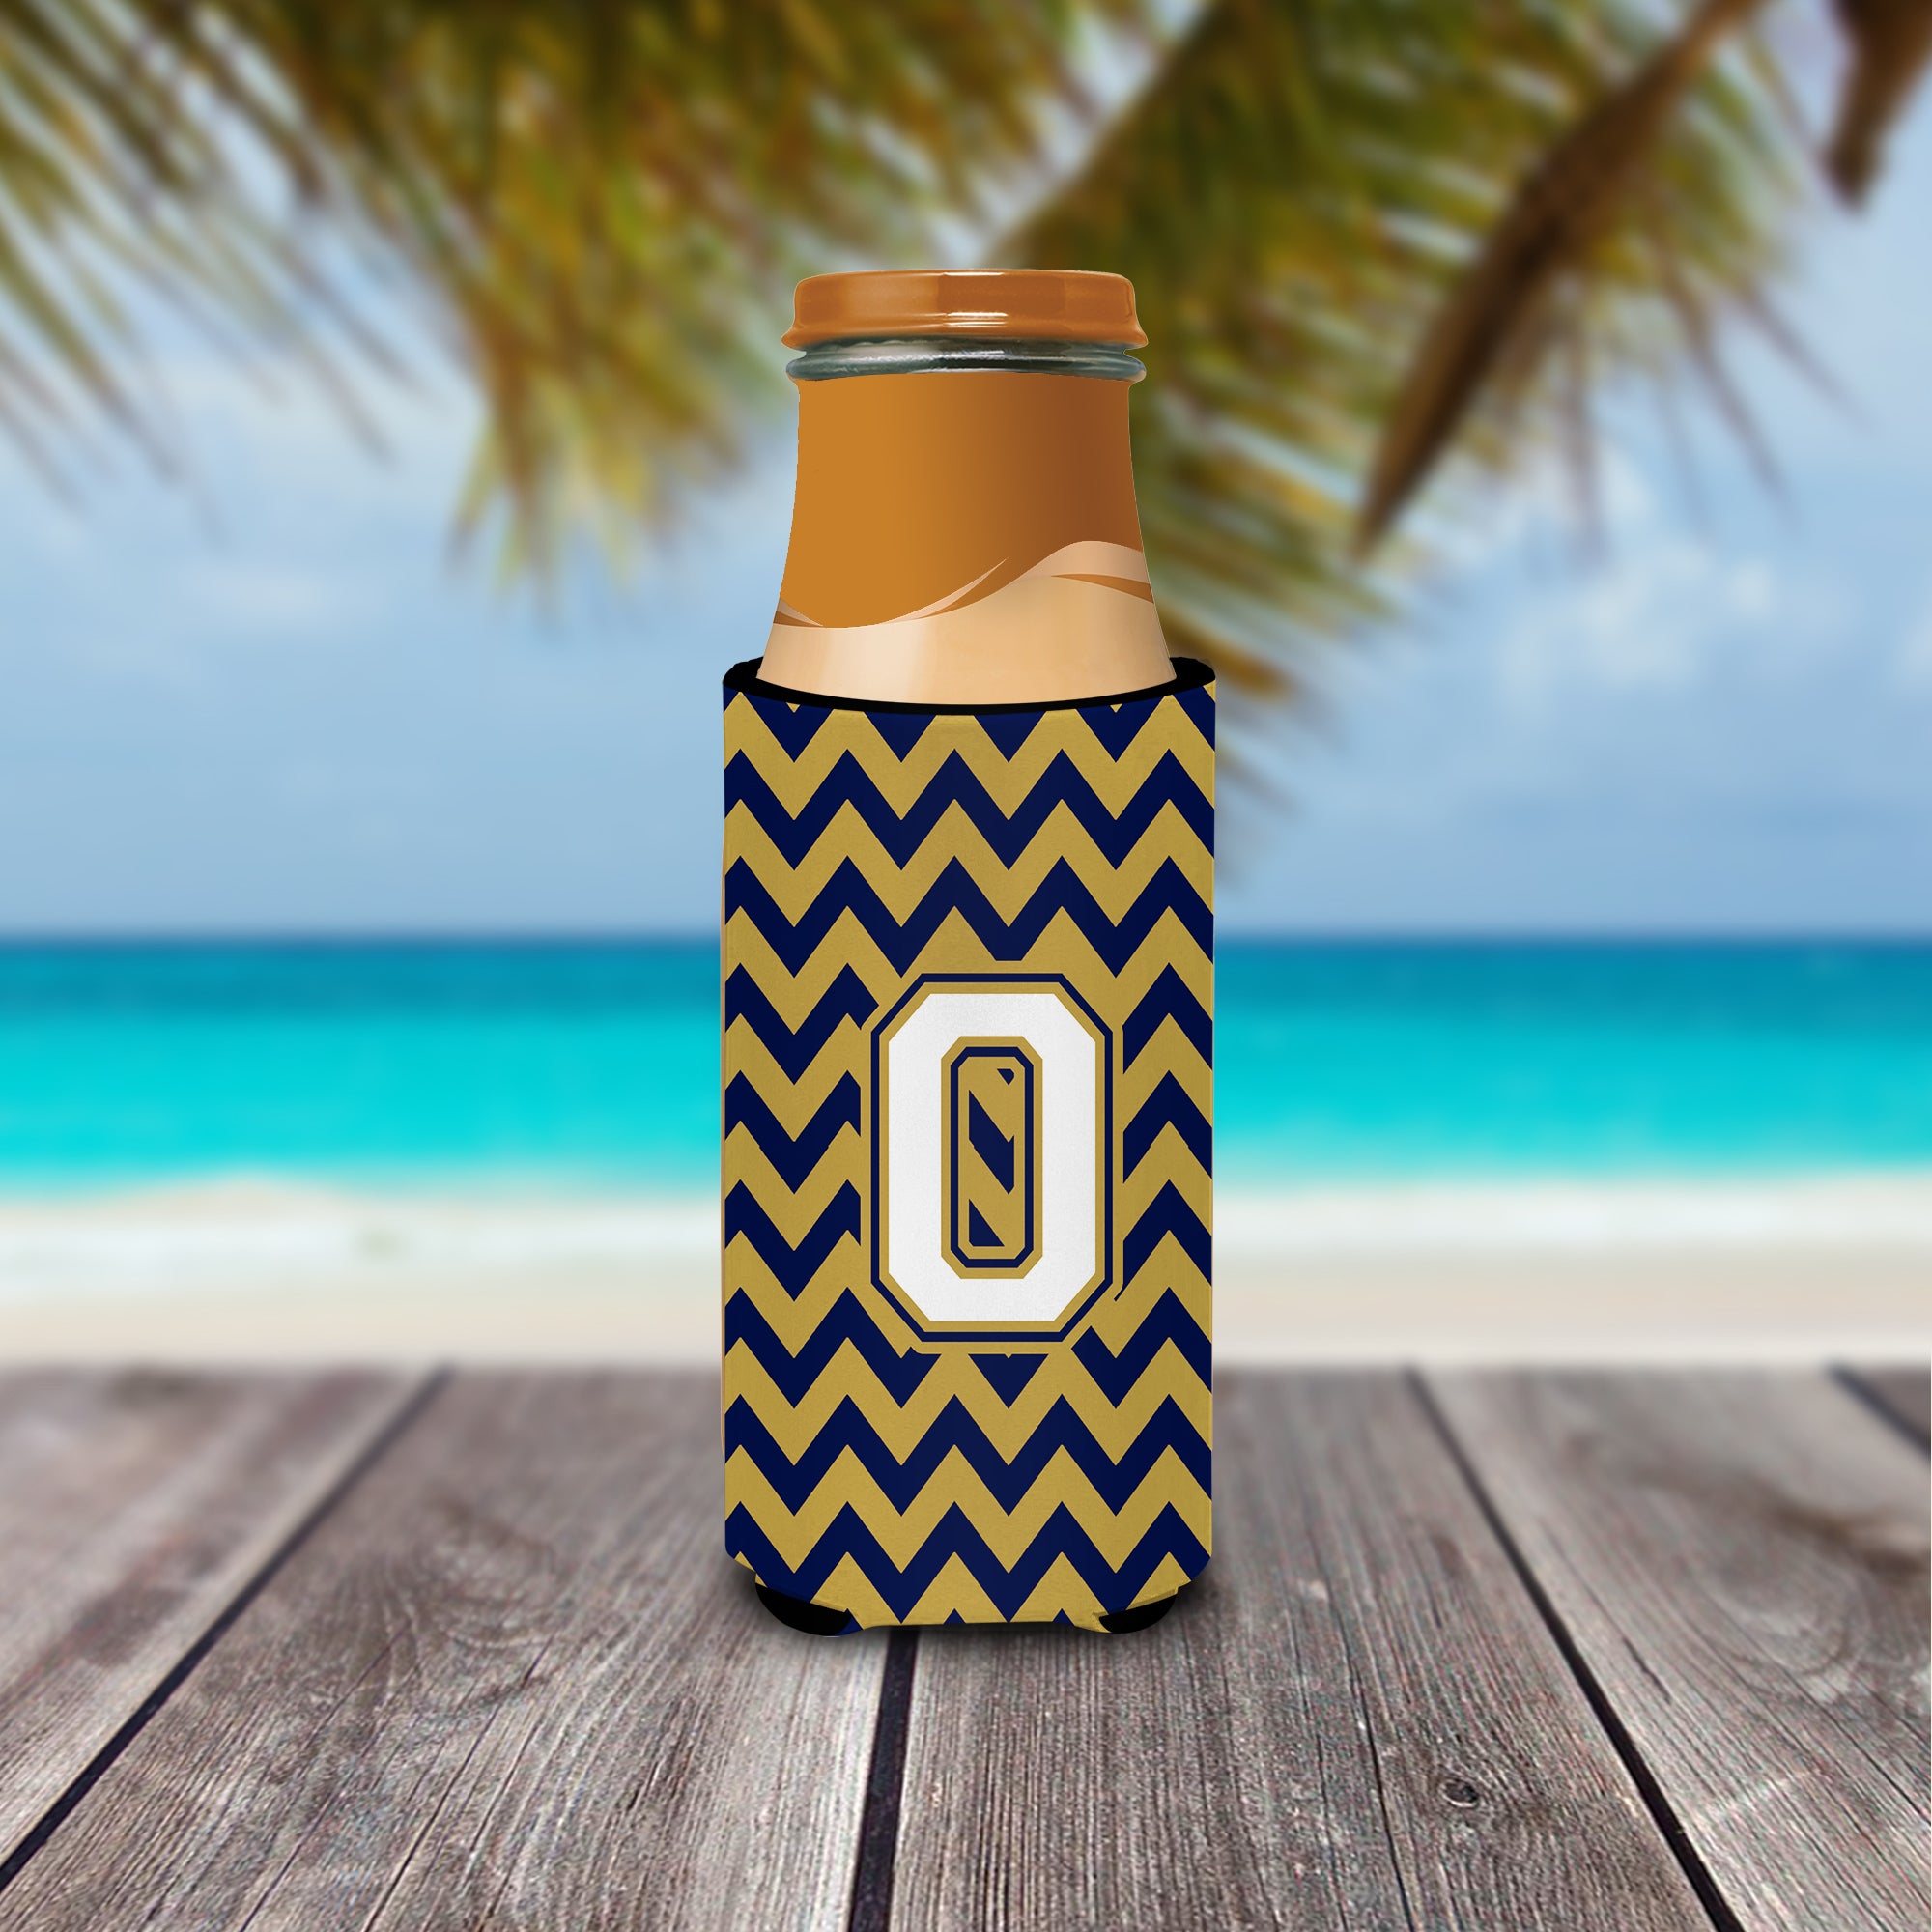 Letter O Chevron Navy Blue and Gold Ultra Beverage Insulators for slim cans CJ1057-OMUK.